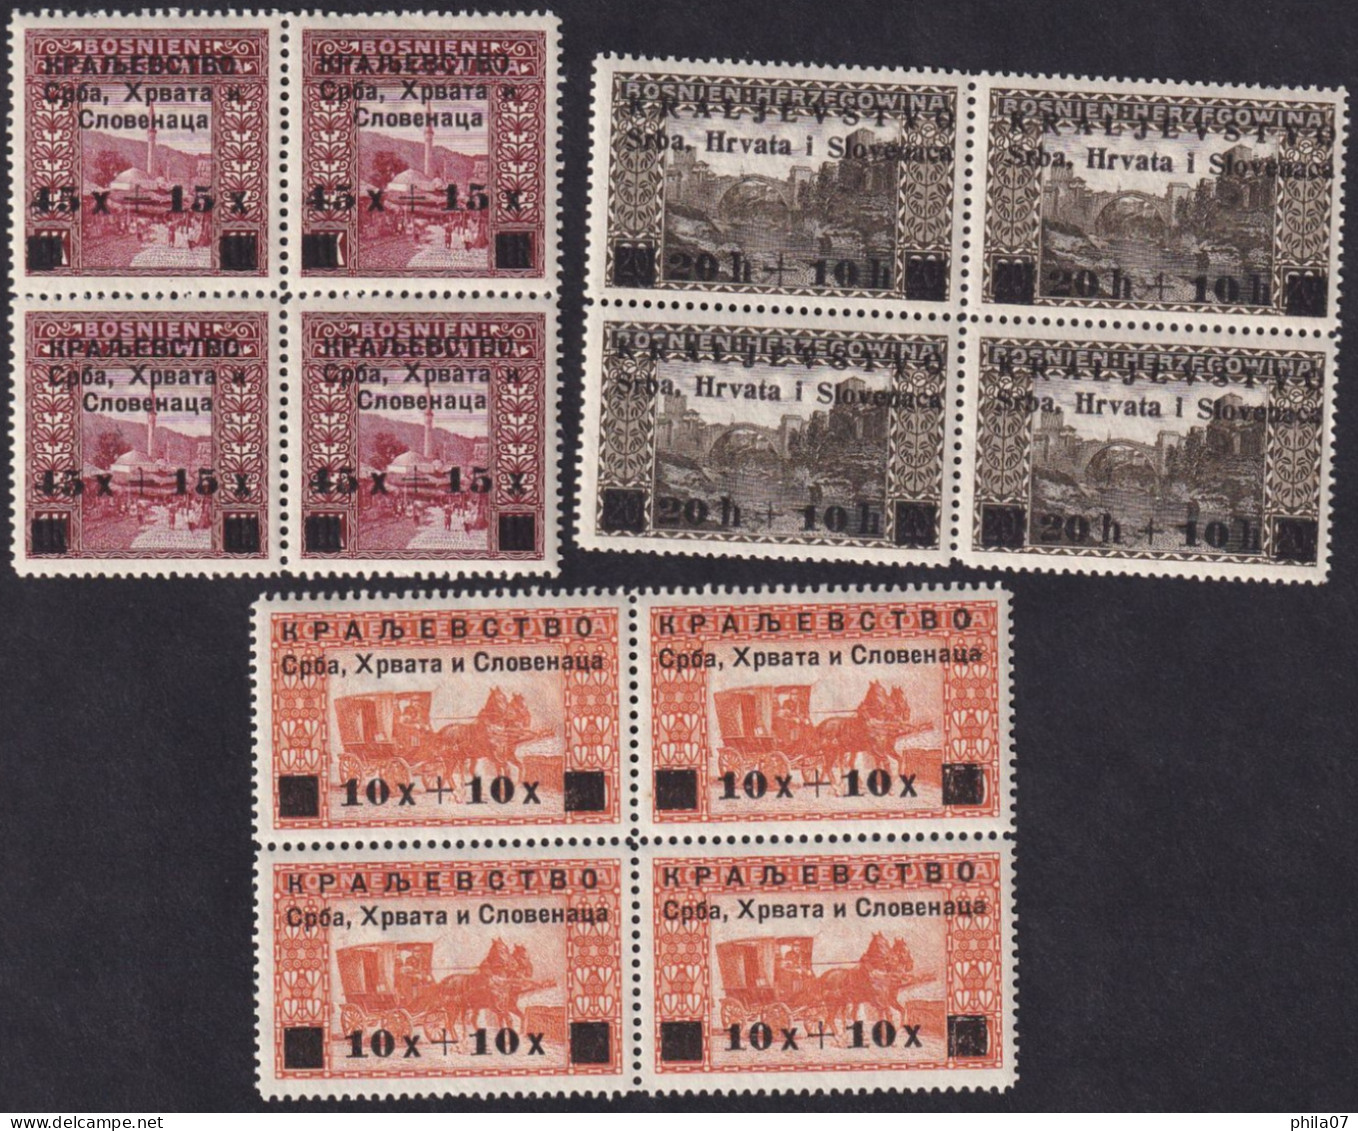 BOSNIA AND HERZEGOVINA - Mi.No. 30/32, Series In Block Of Four And In Excellent Quality / 2 Scan - Bosnie-Herzegovine